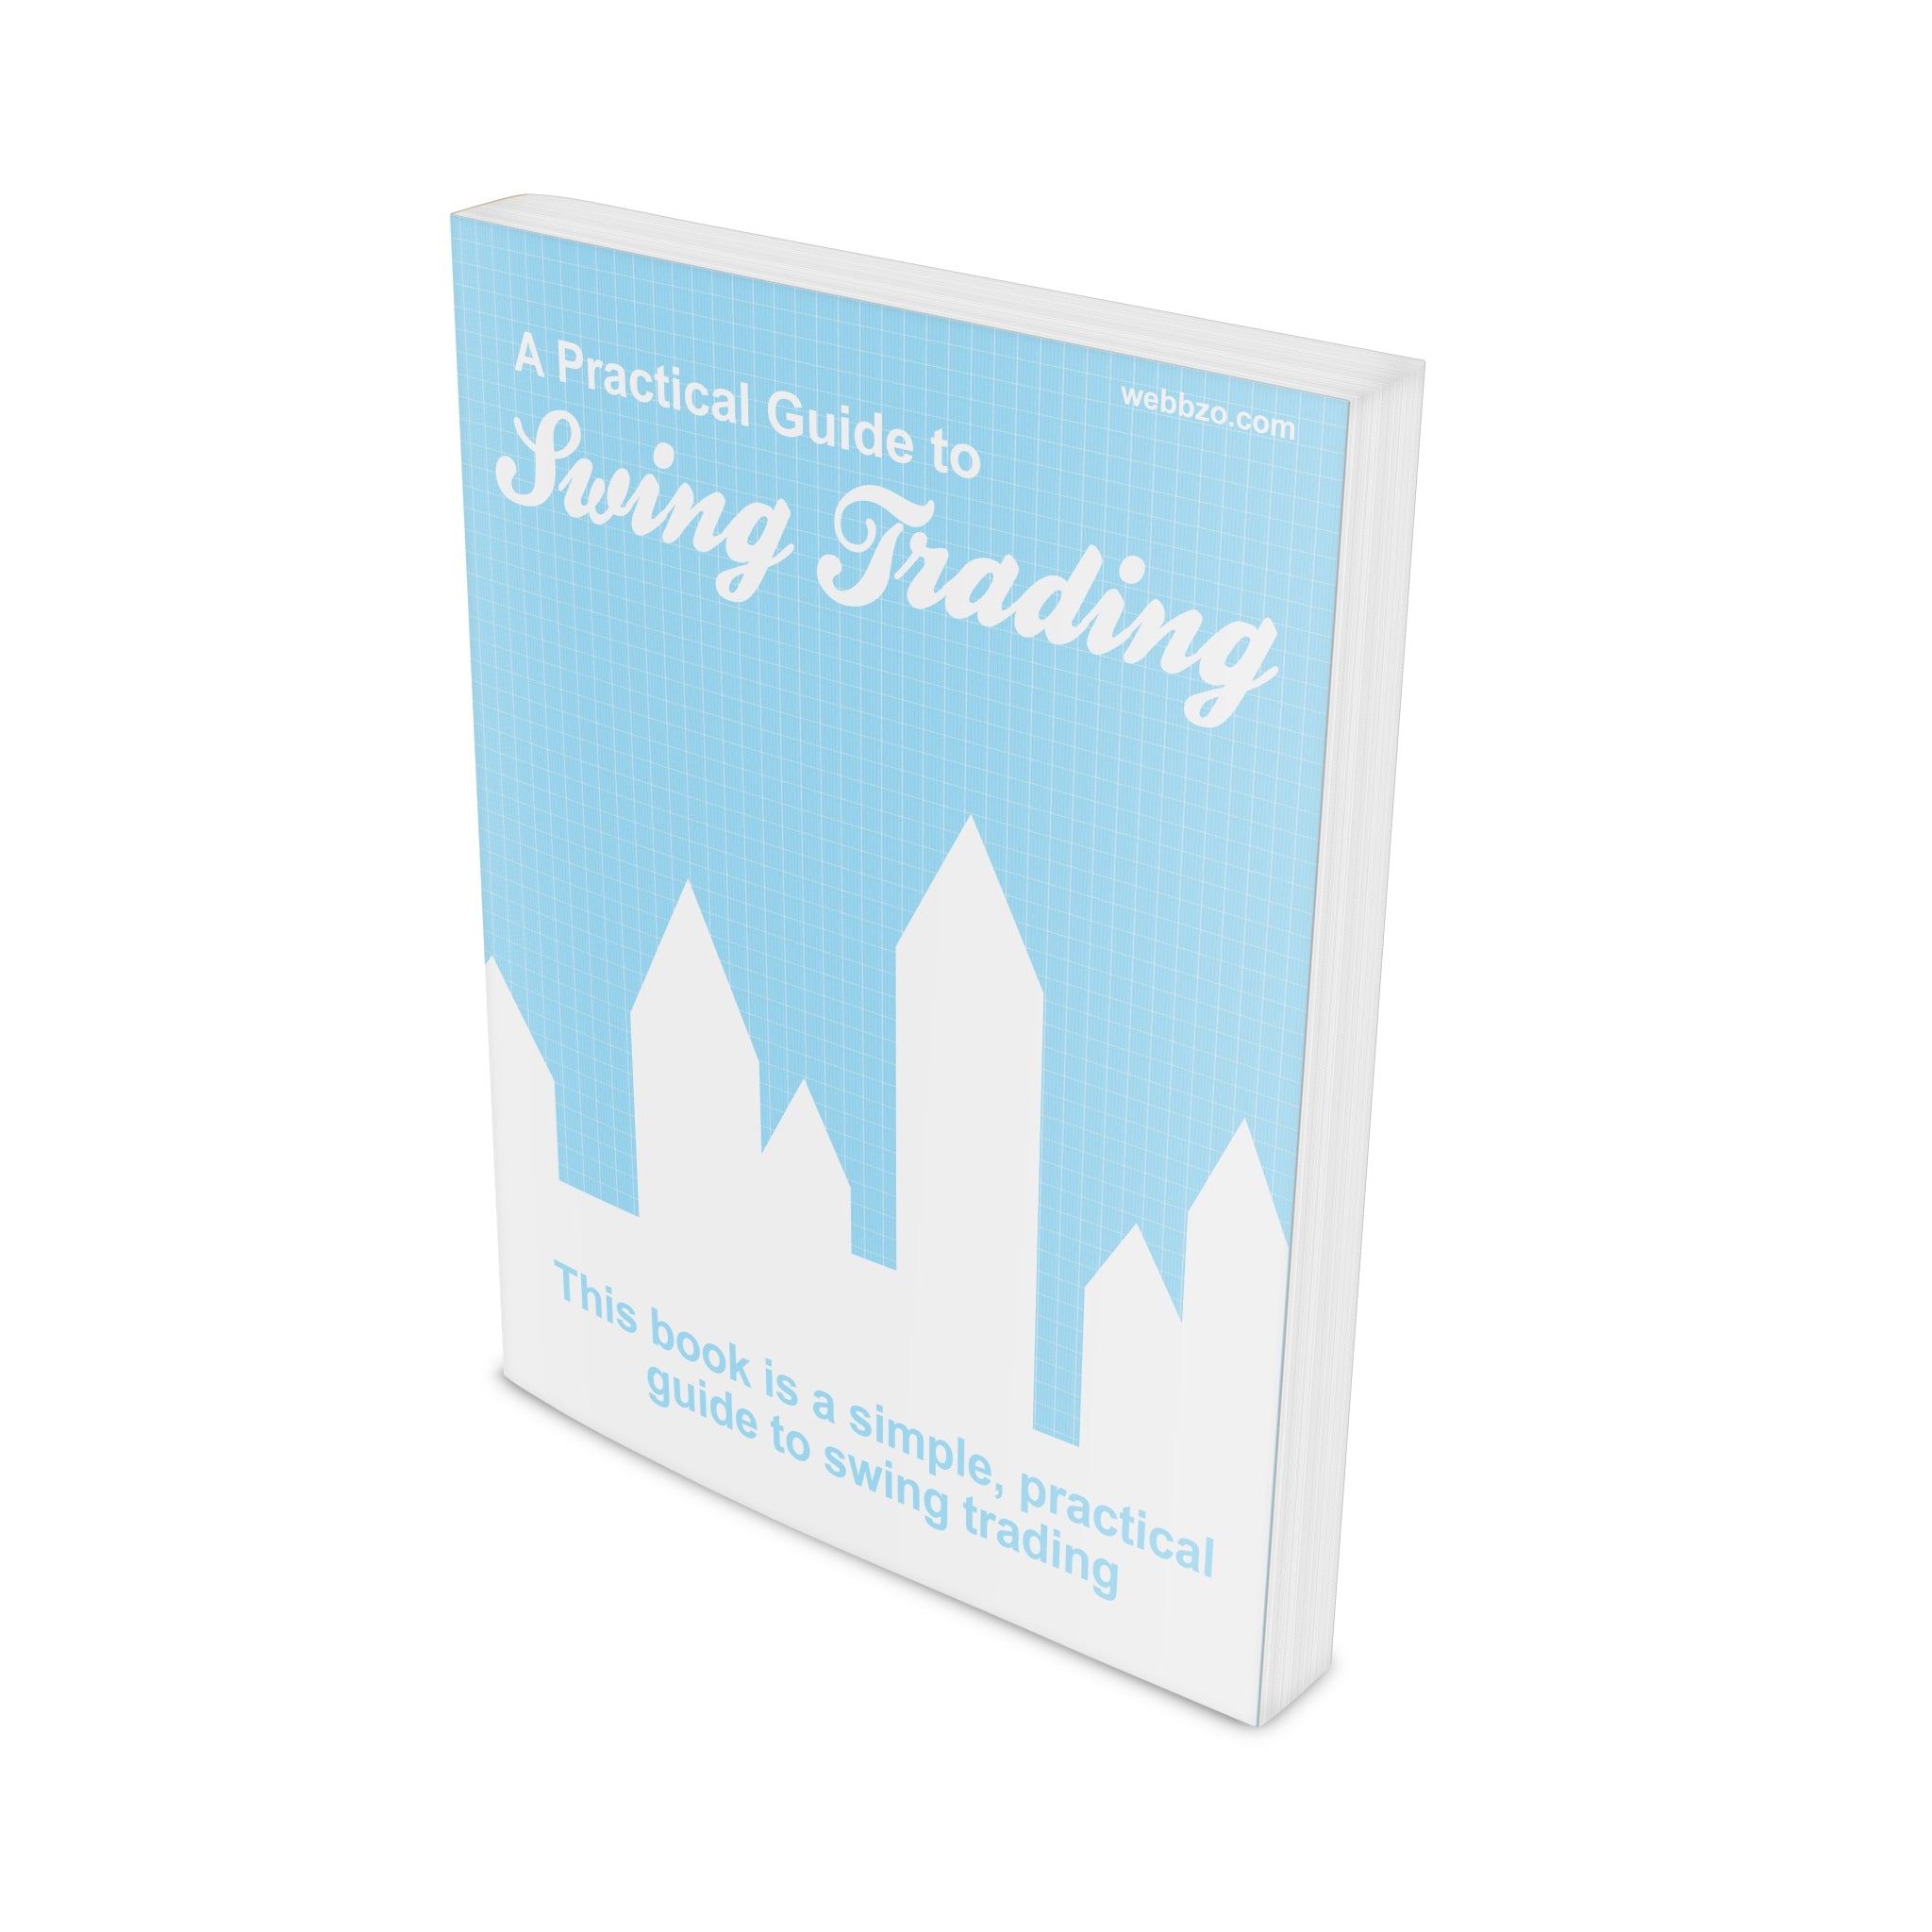 A Practical Guide to Swing Trading Ebook